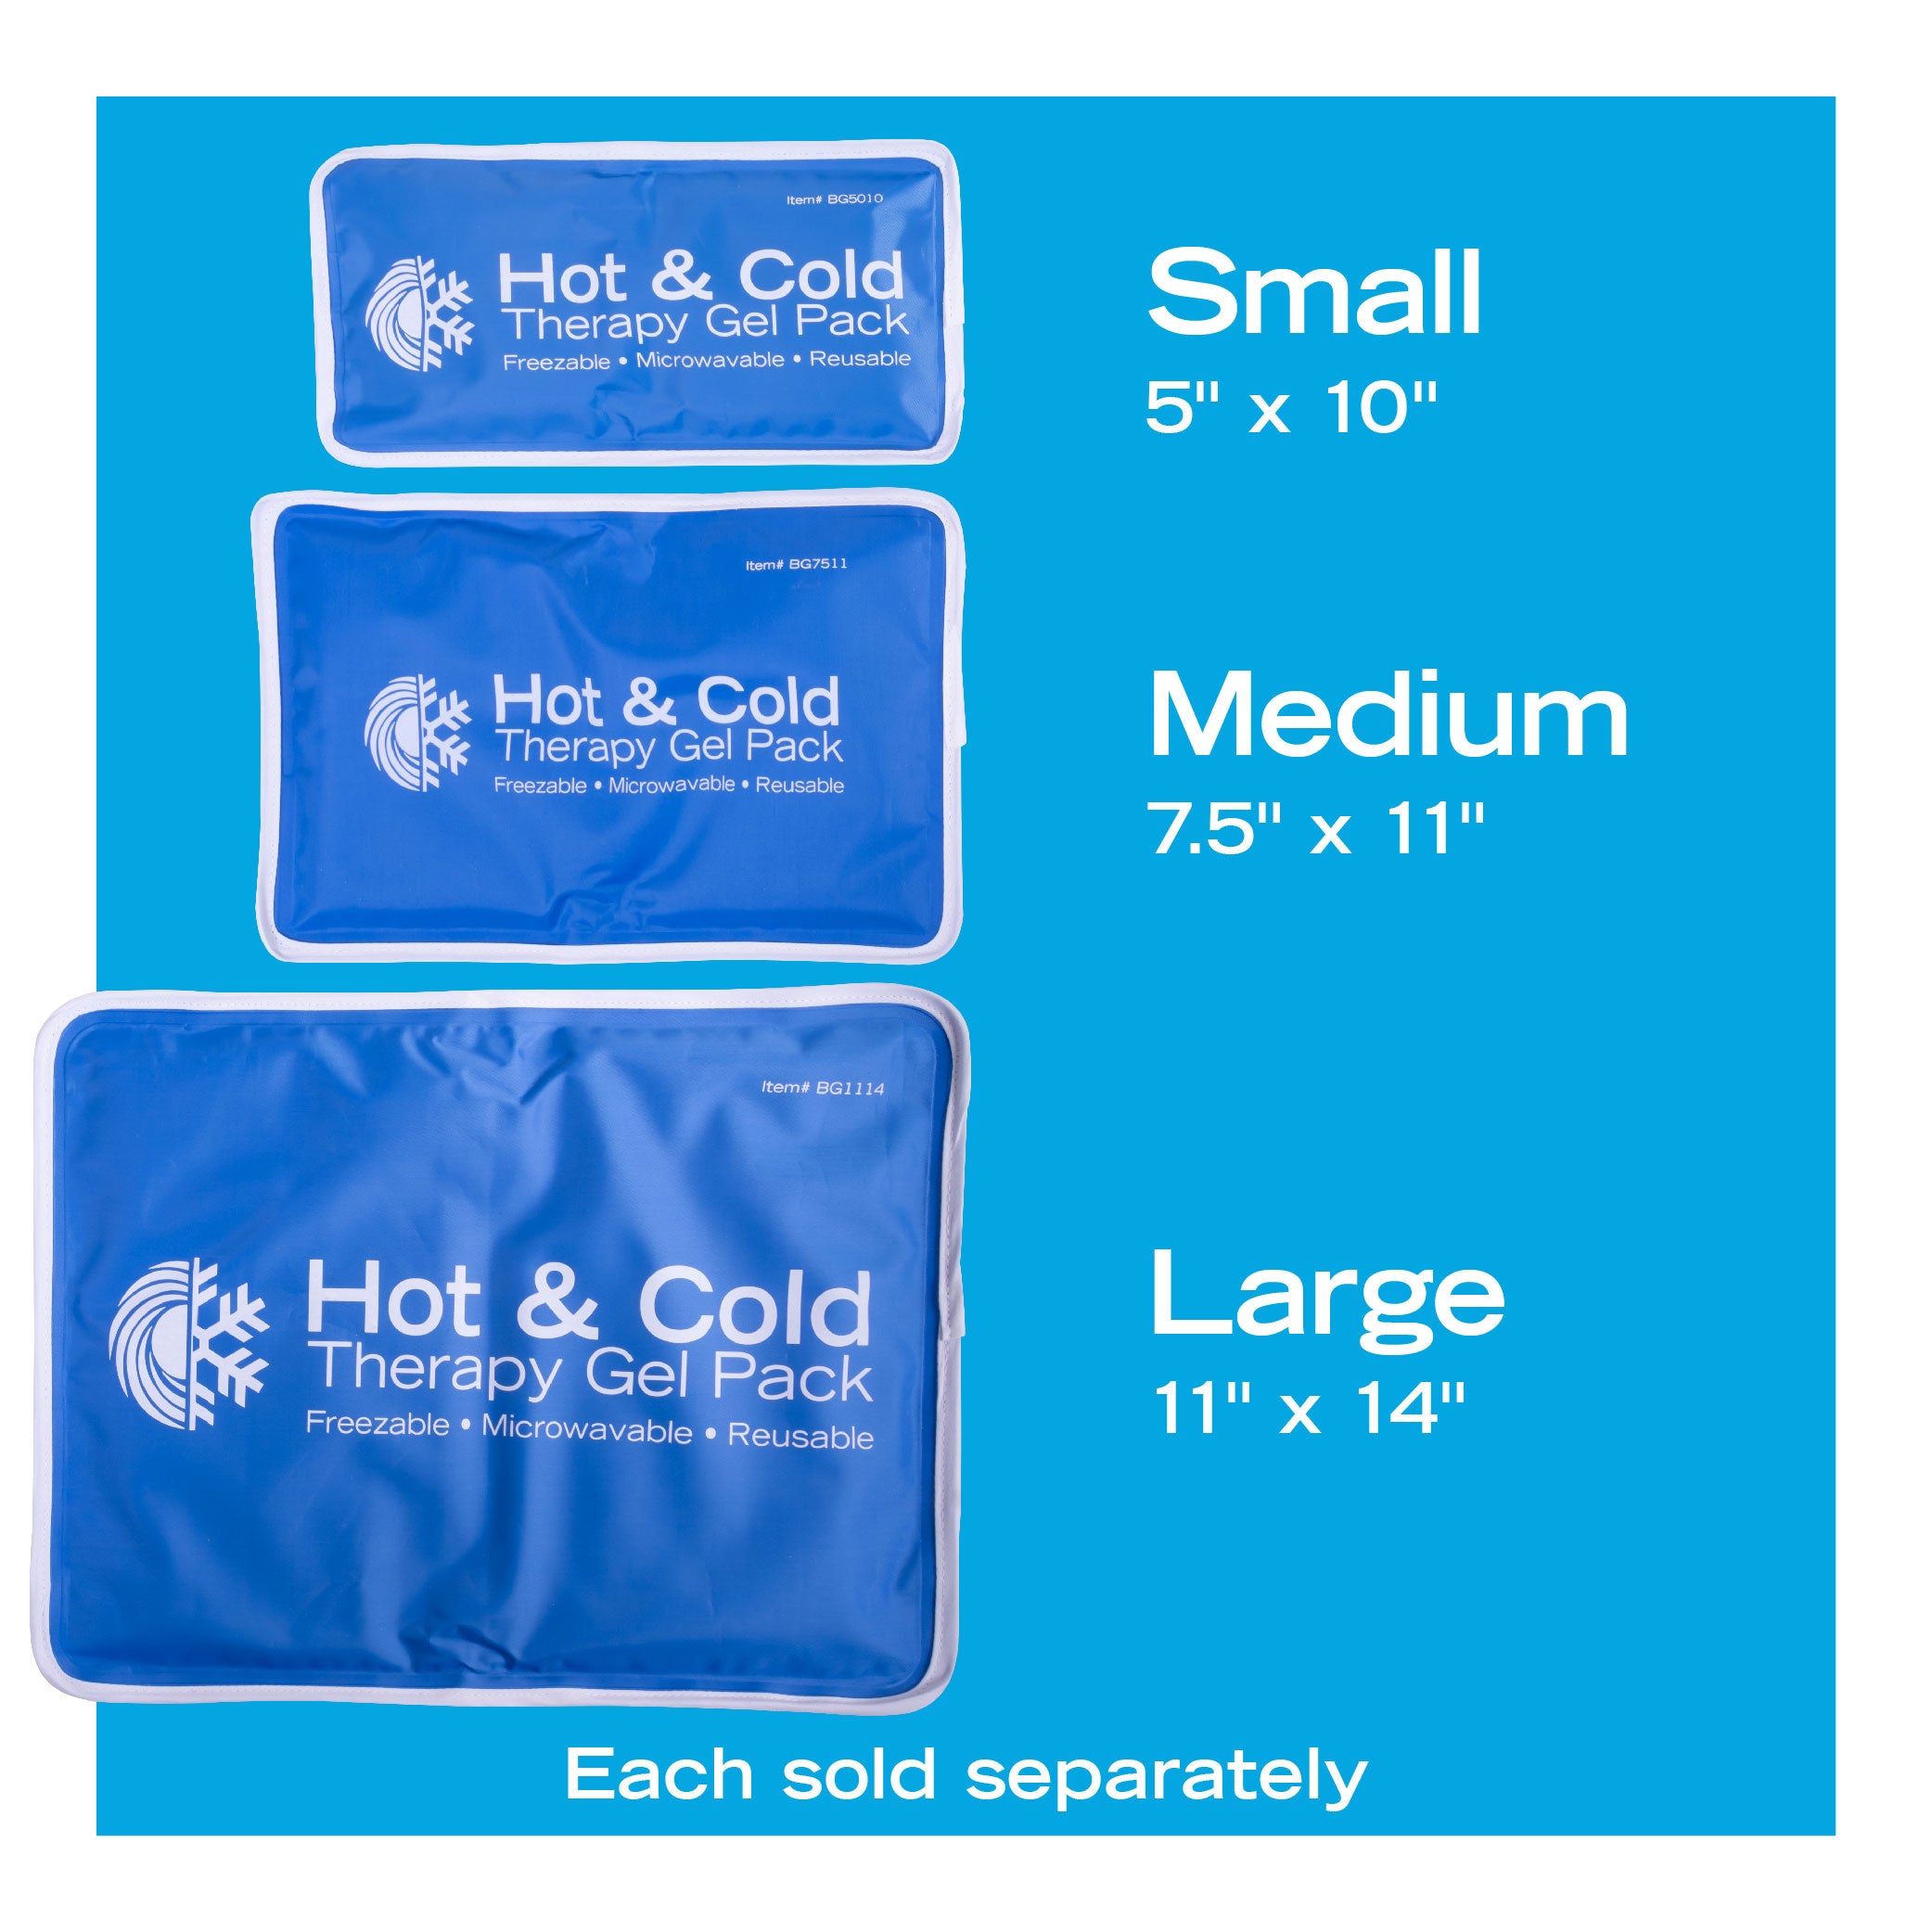 Reusable Hot and Cold Gel Compress